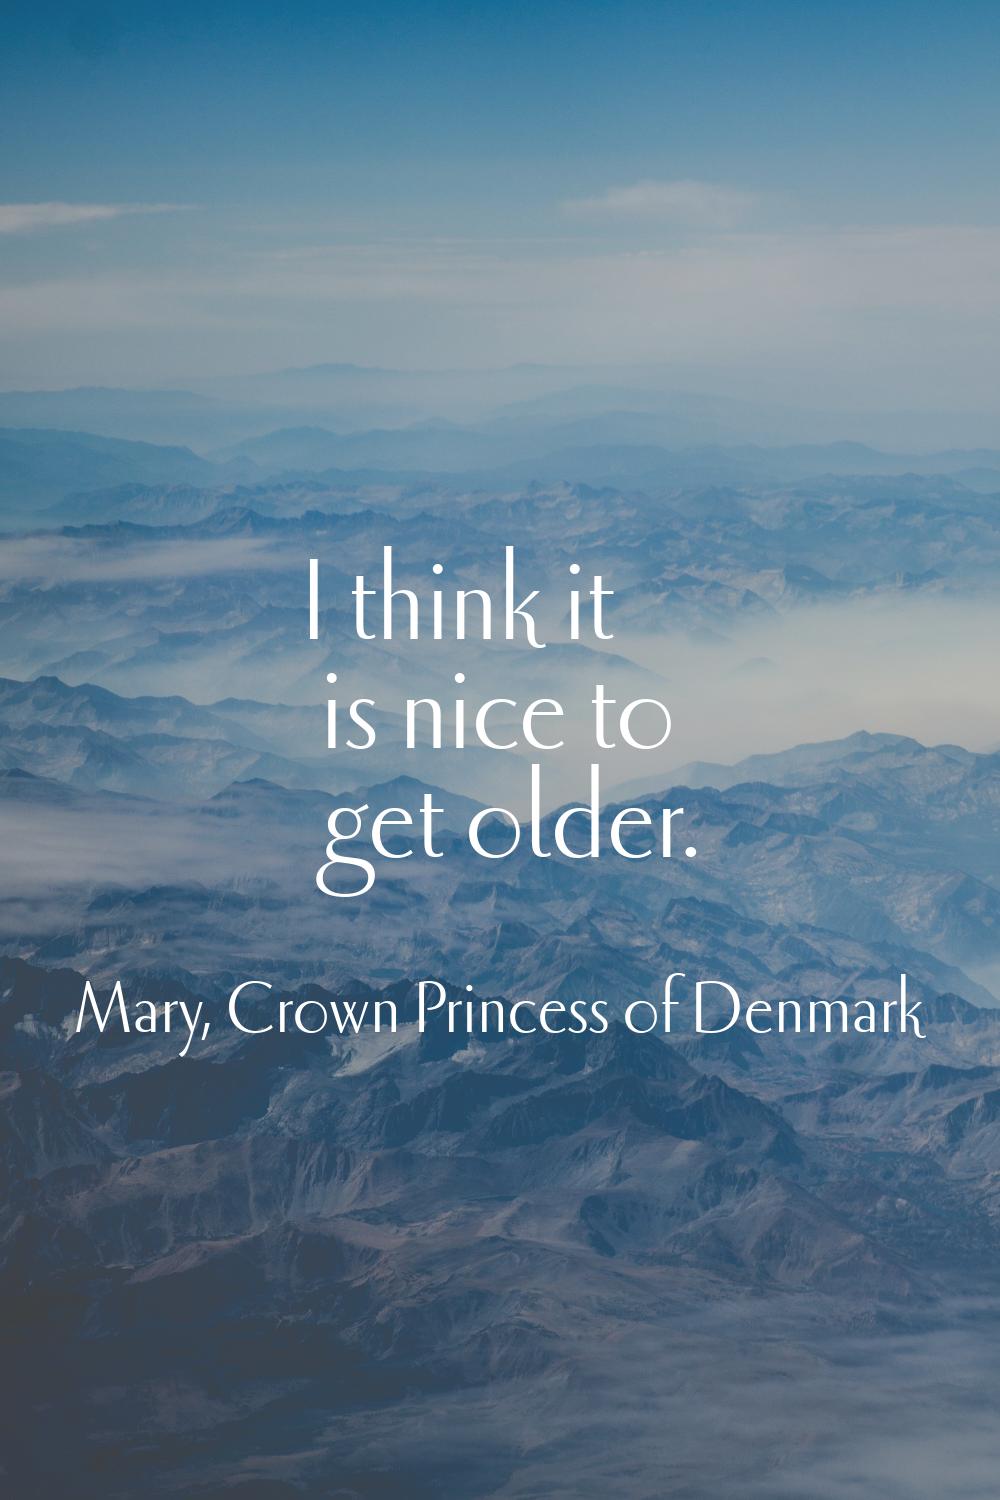 I think it is nice to get older.